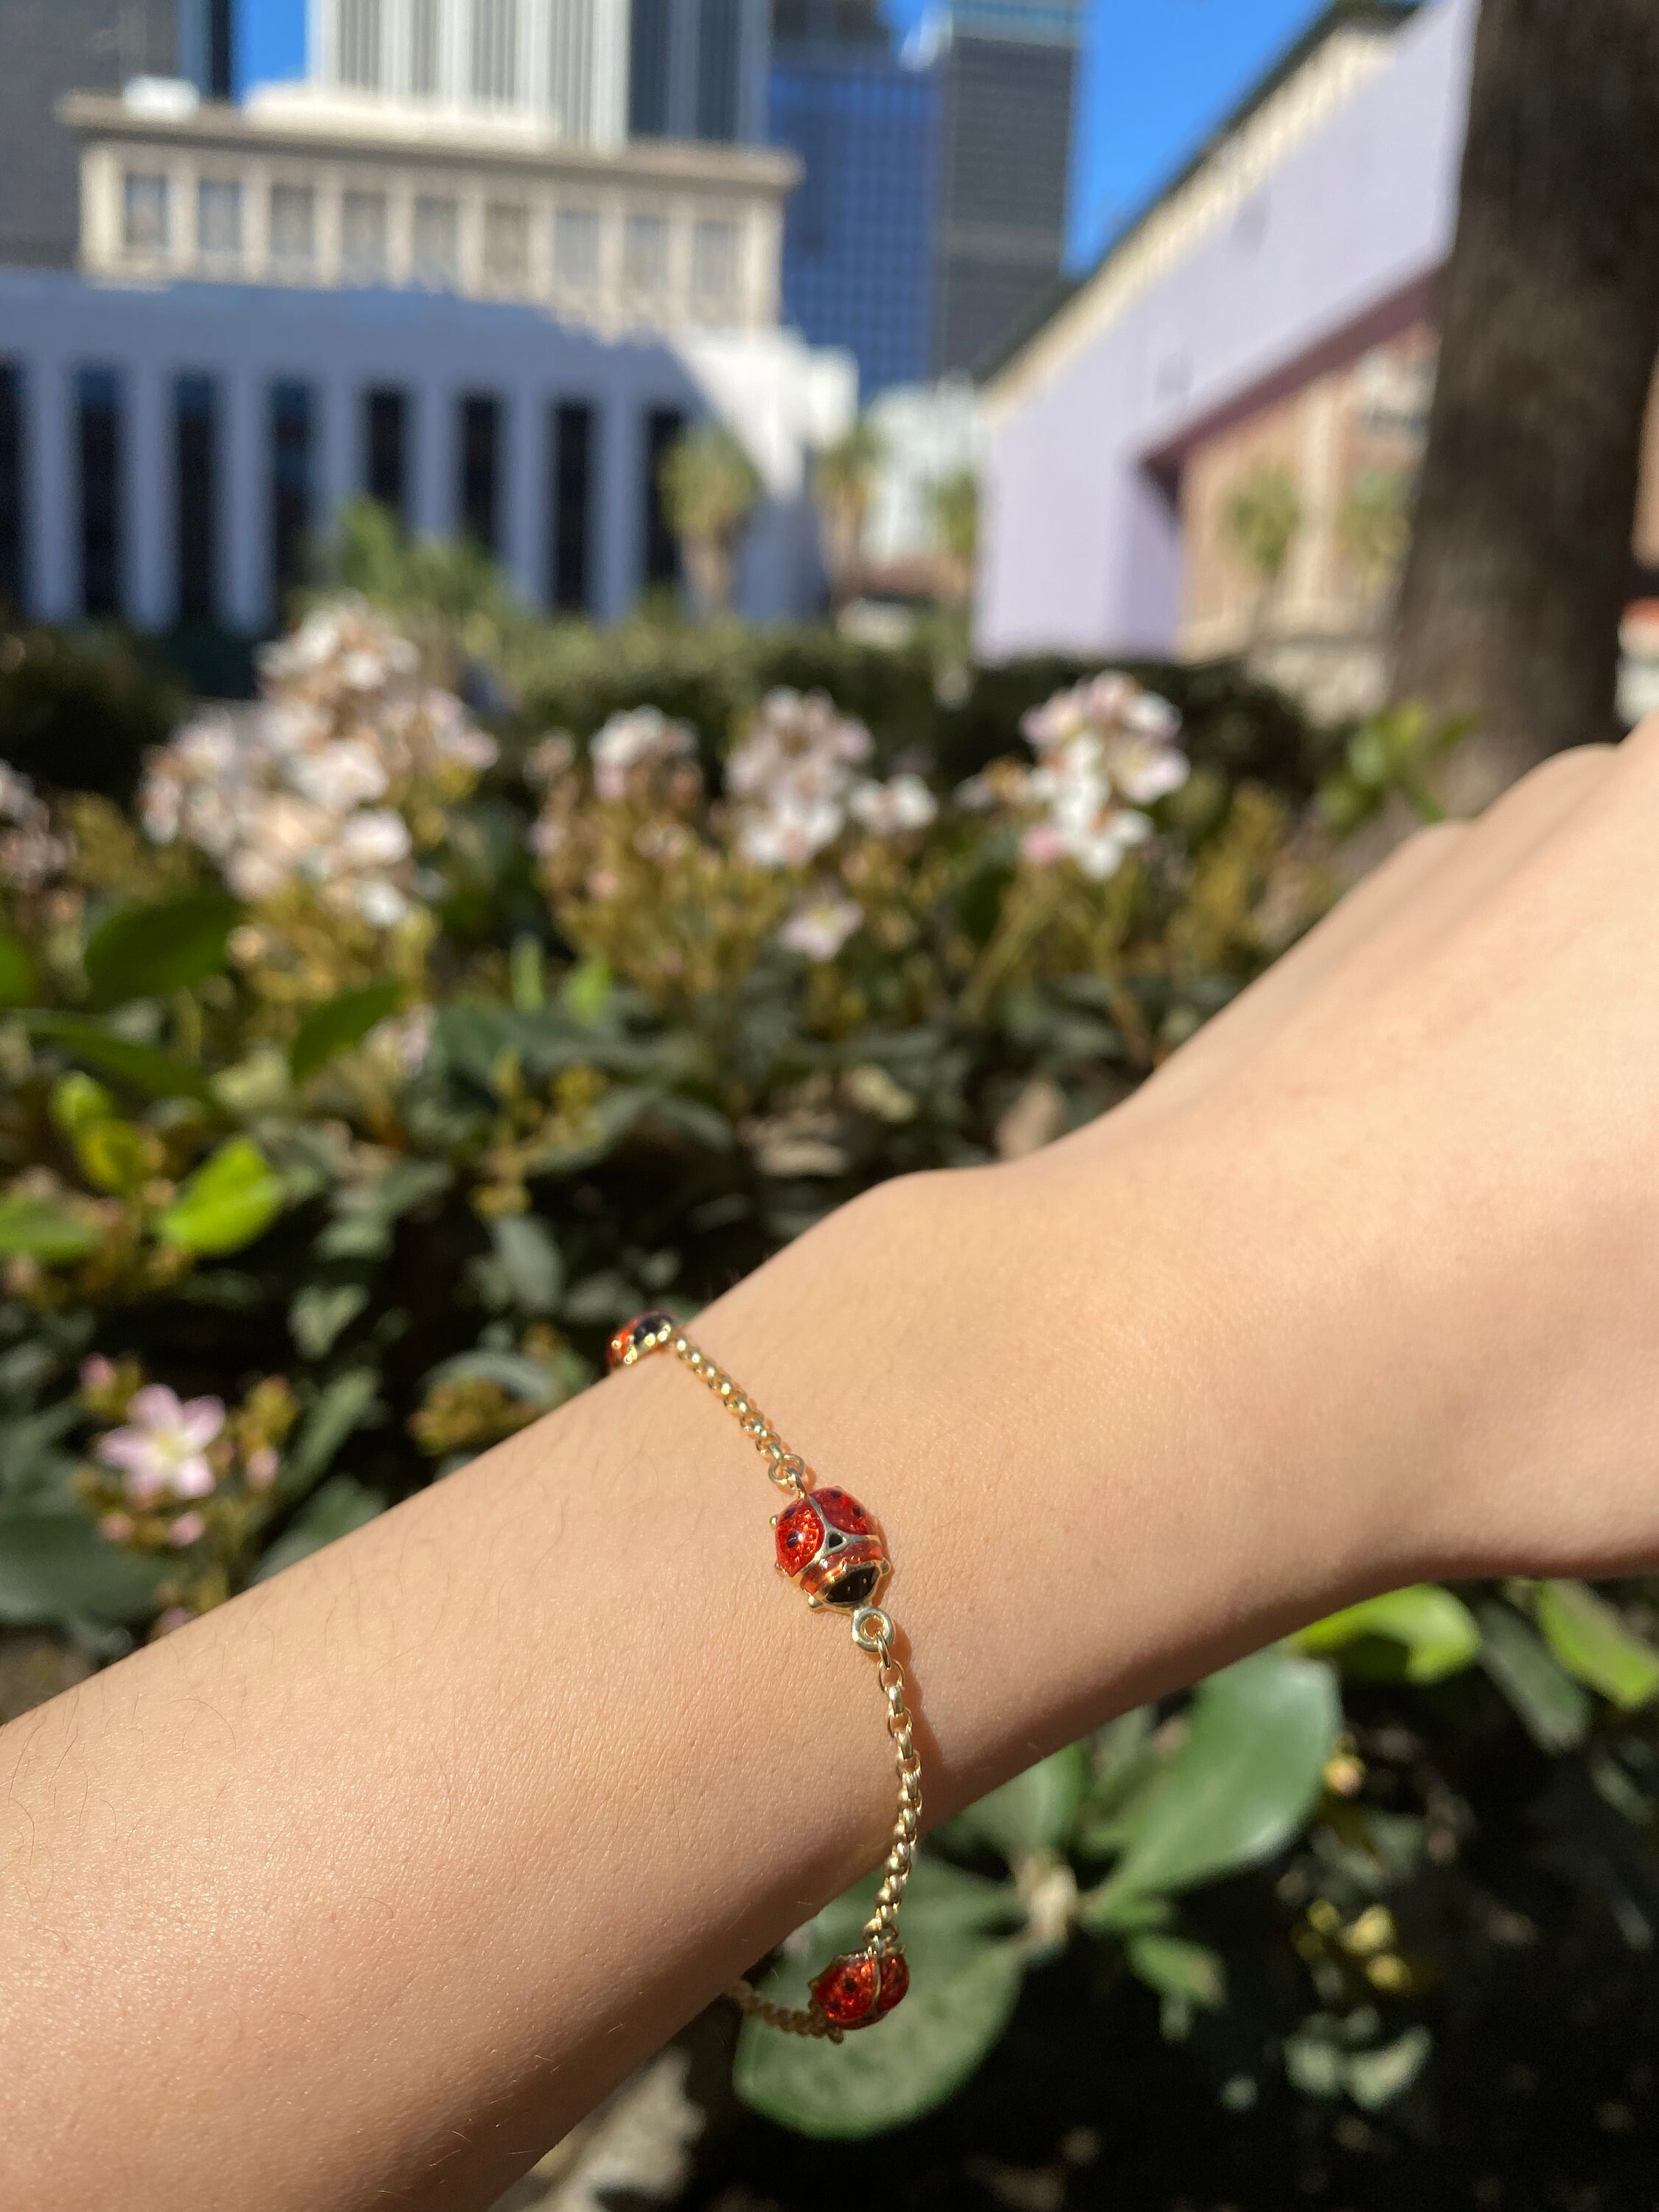 My First ID Bracelet With Polished Plaque And Lady Bug Charm